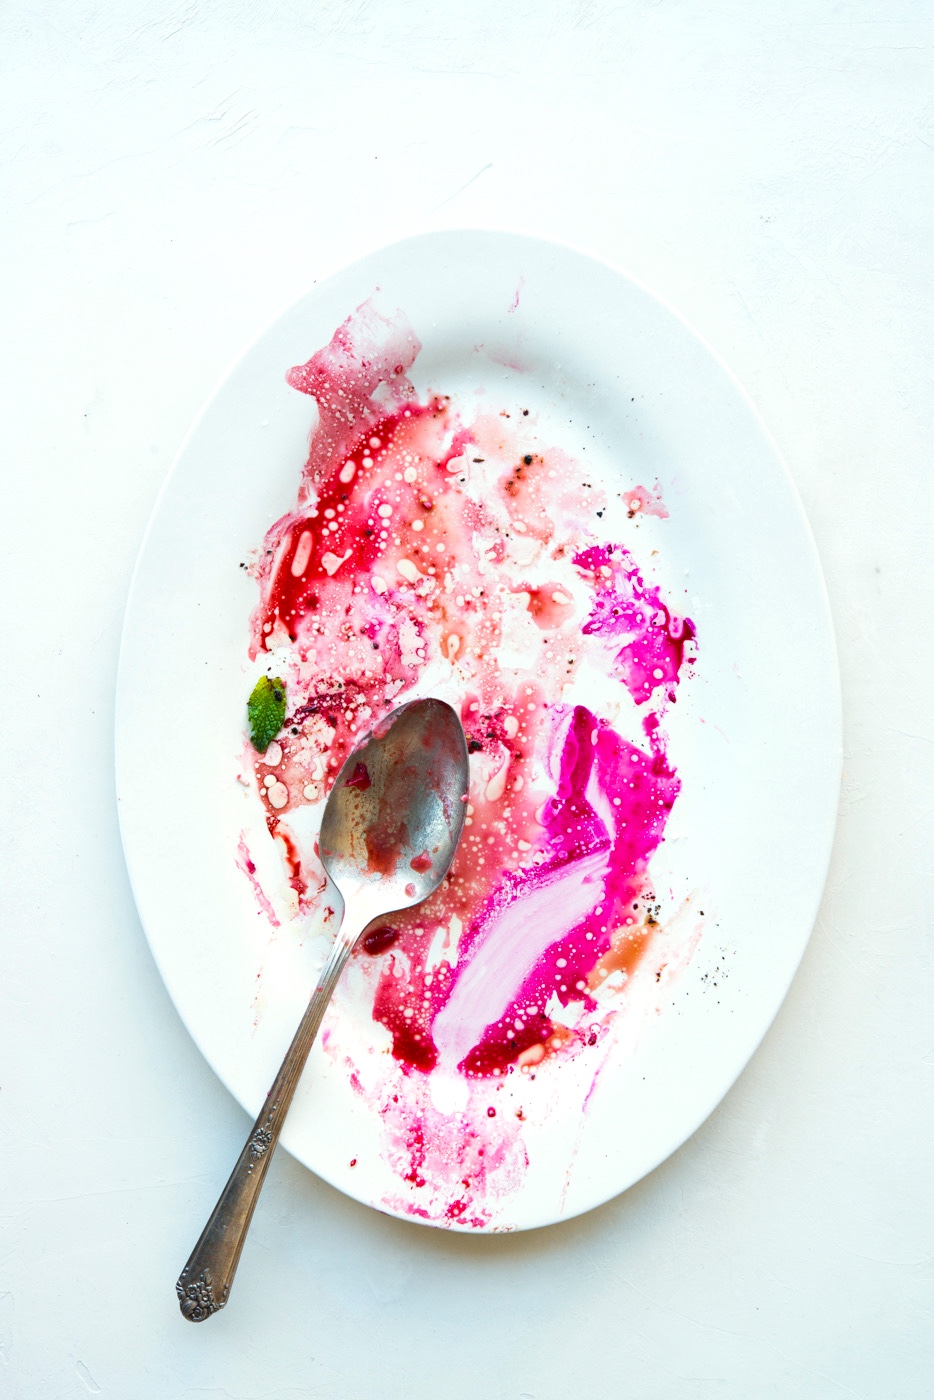 Empty plate with beet juice by commercial food photographer Sarah Flotard  